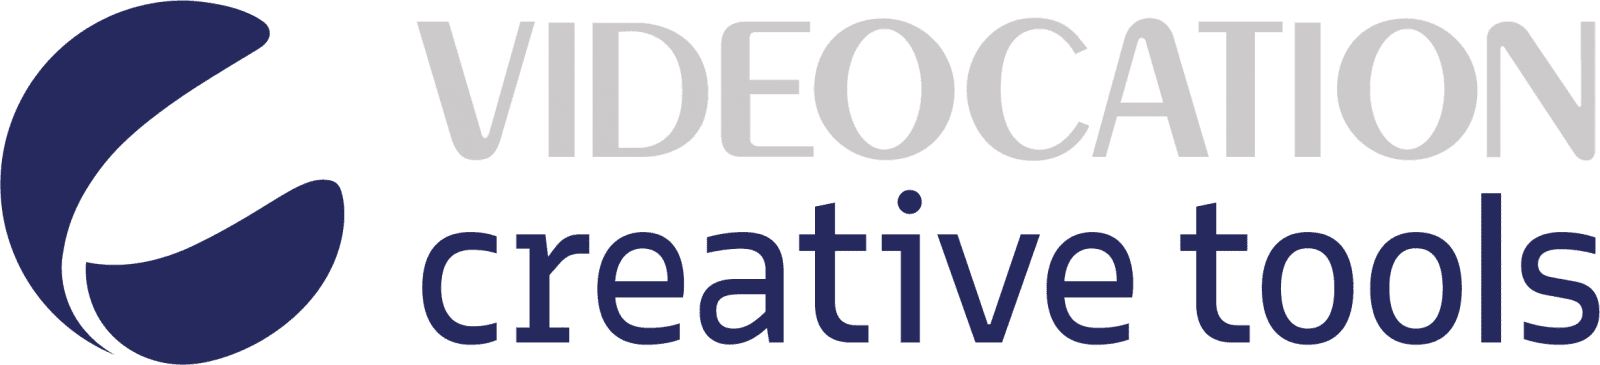 VCT Videocation Creative Tools GmbH